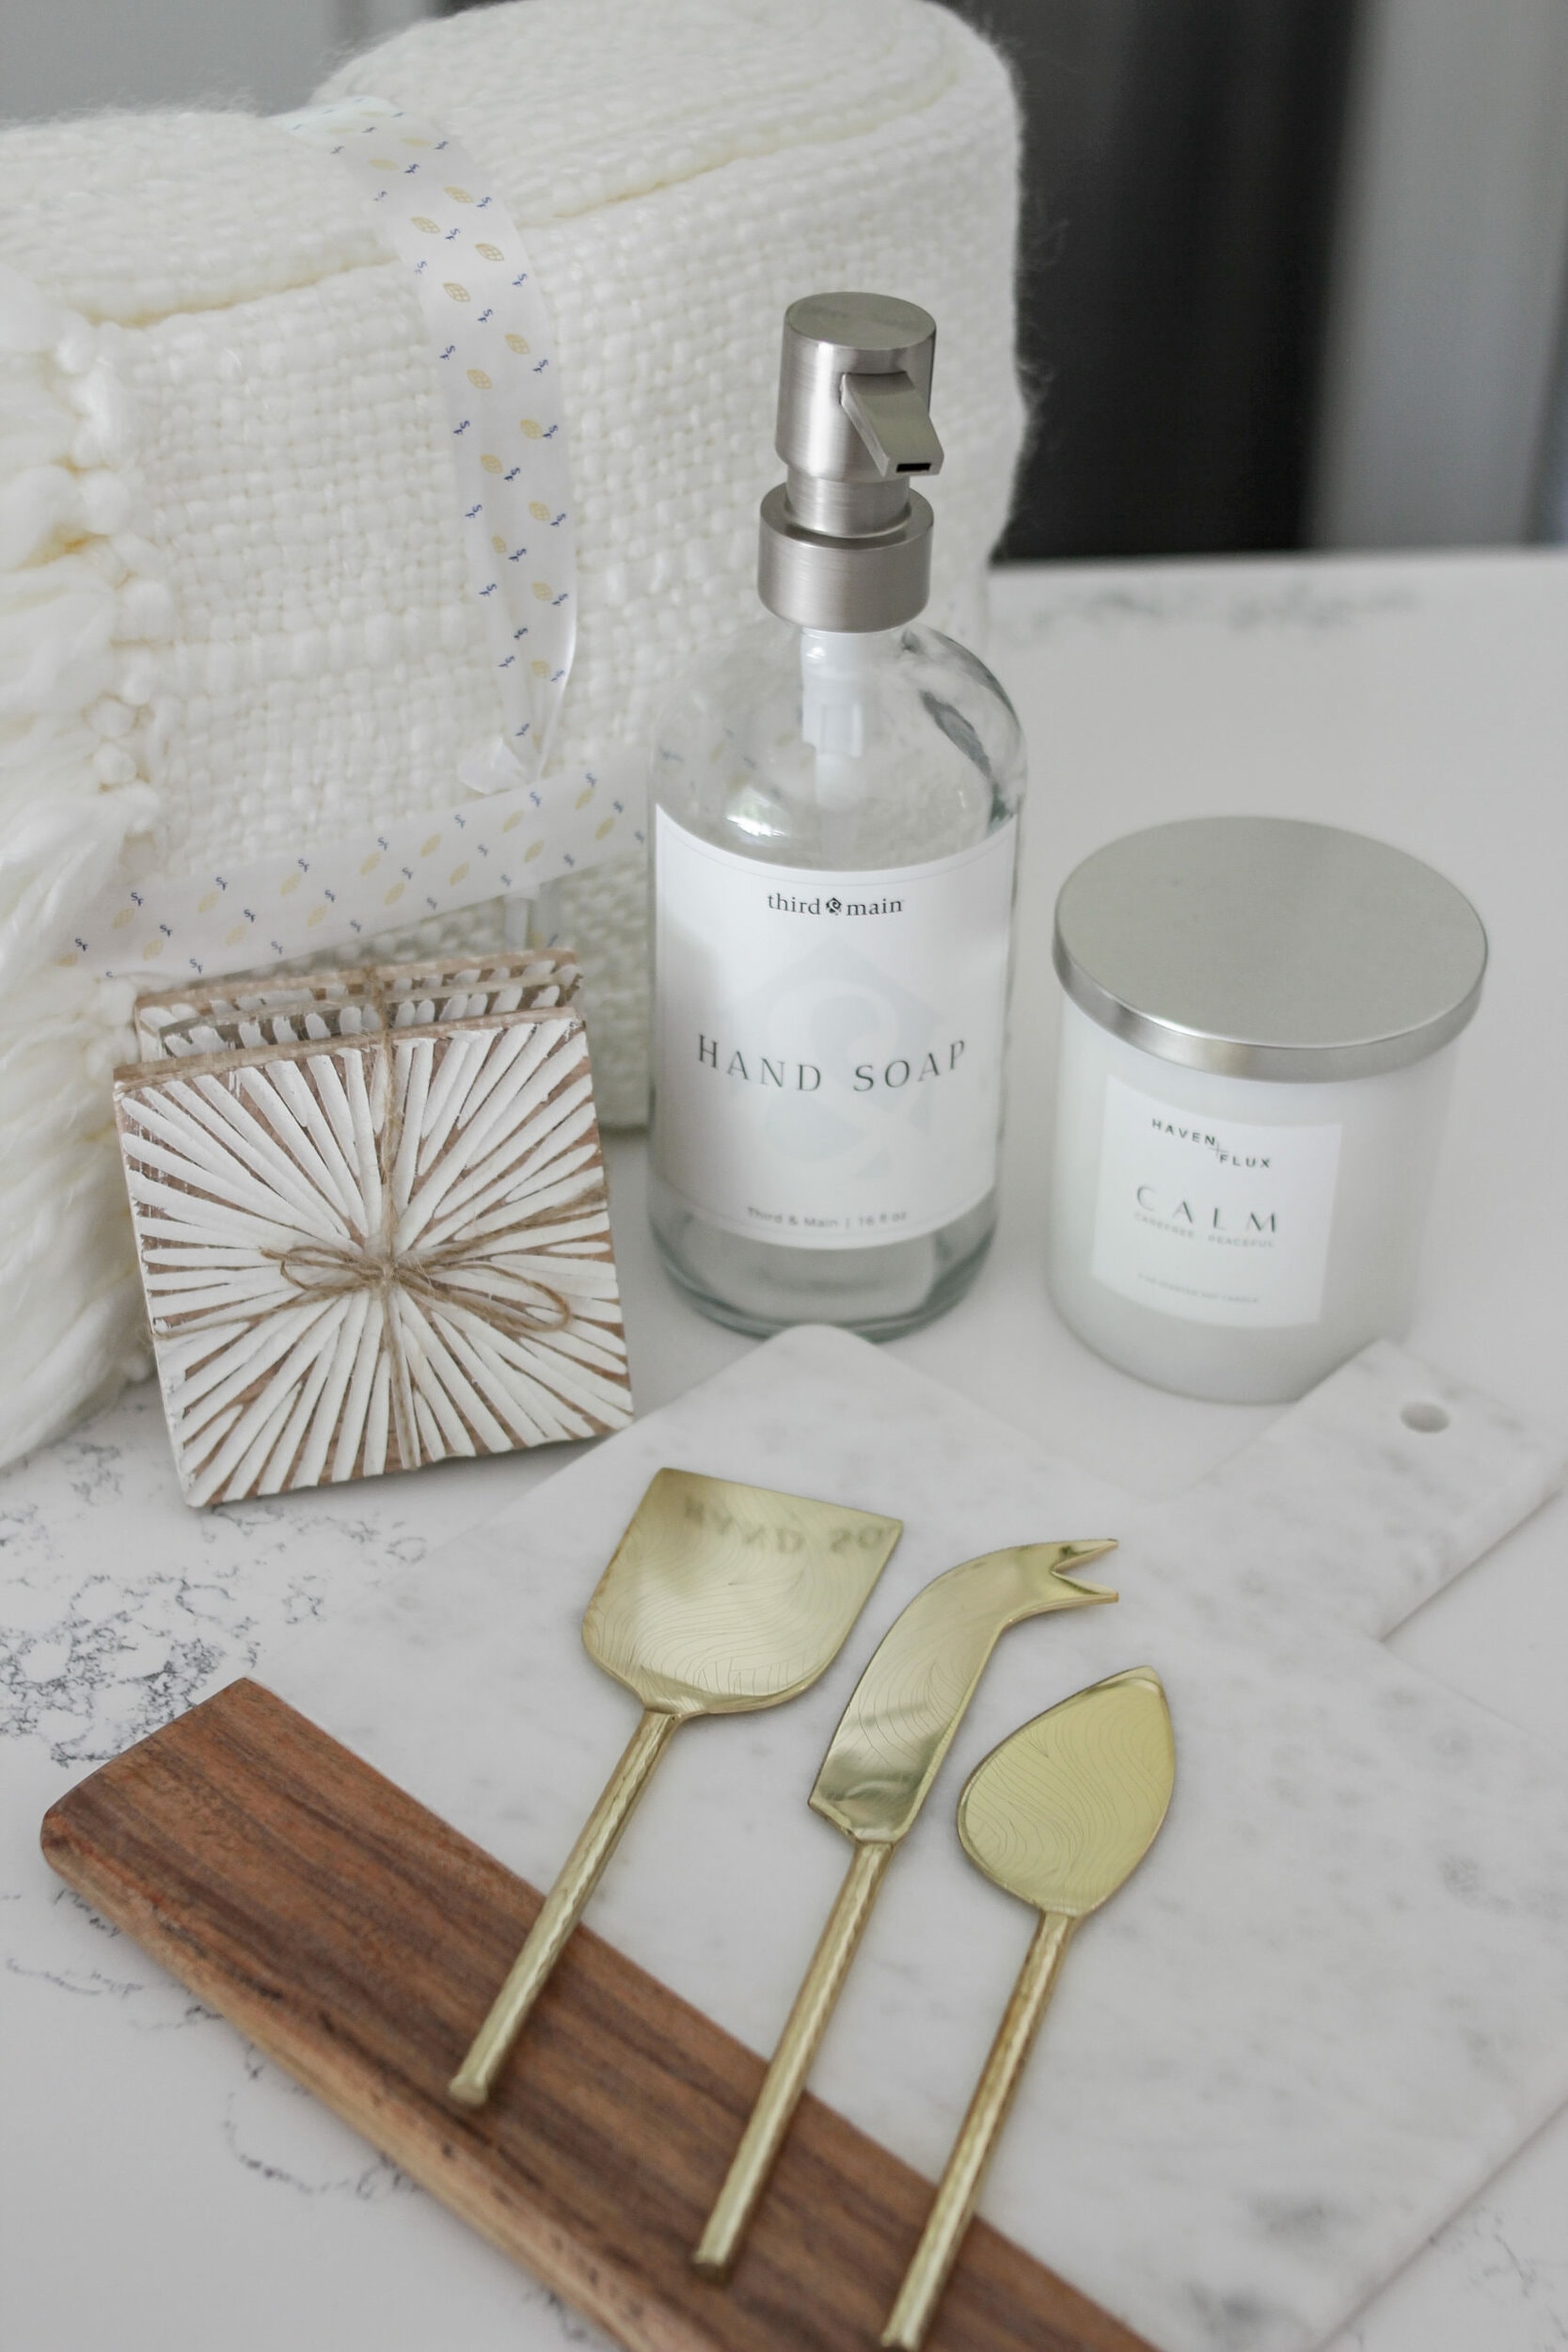 for the decor lover home decor box from third and main featuring a third & main hand soap bottle, haven + flux calm luxury candle, mango wood starburst coaster, cream knit tasseled throw, mango wood acacia and marble wood cutting board, golden cheese knife set